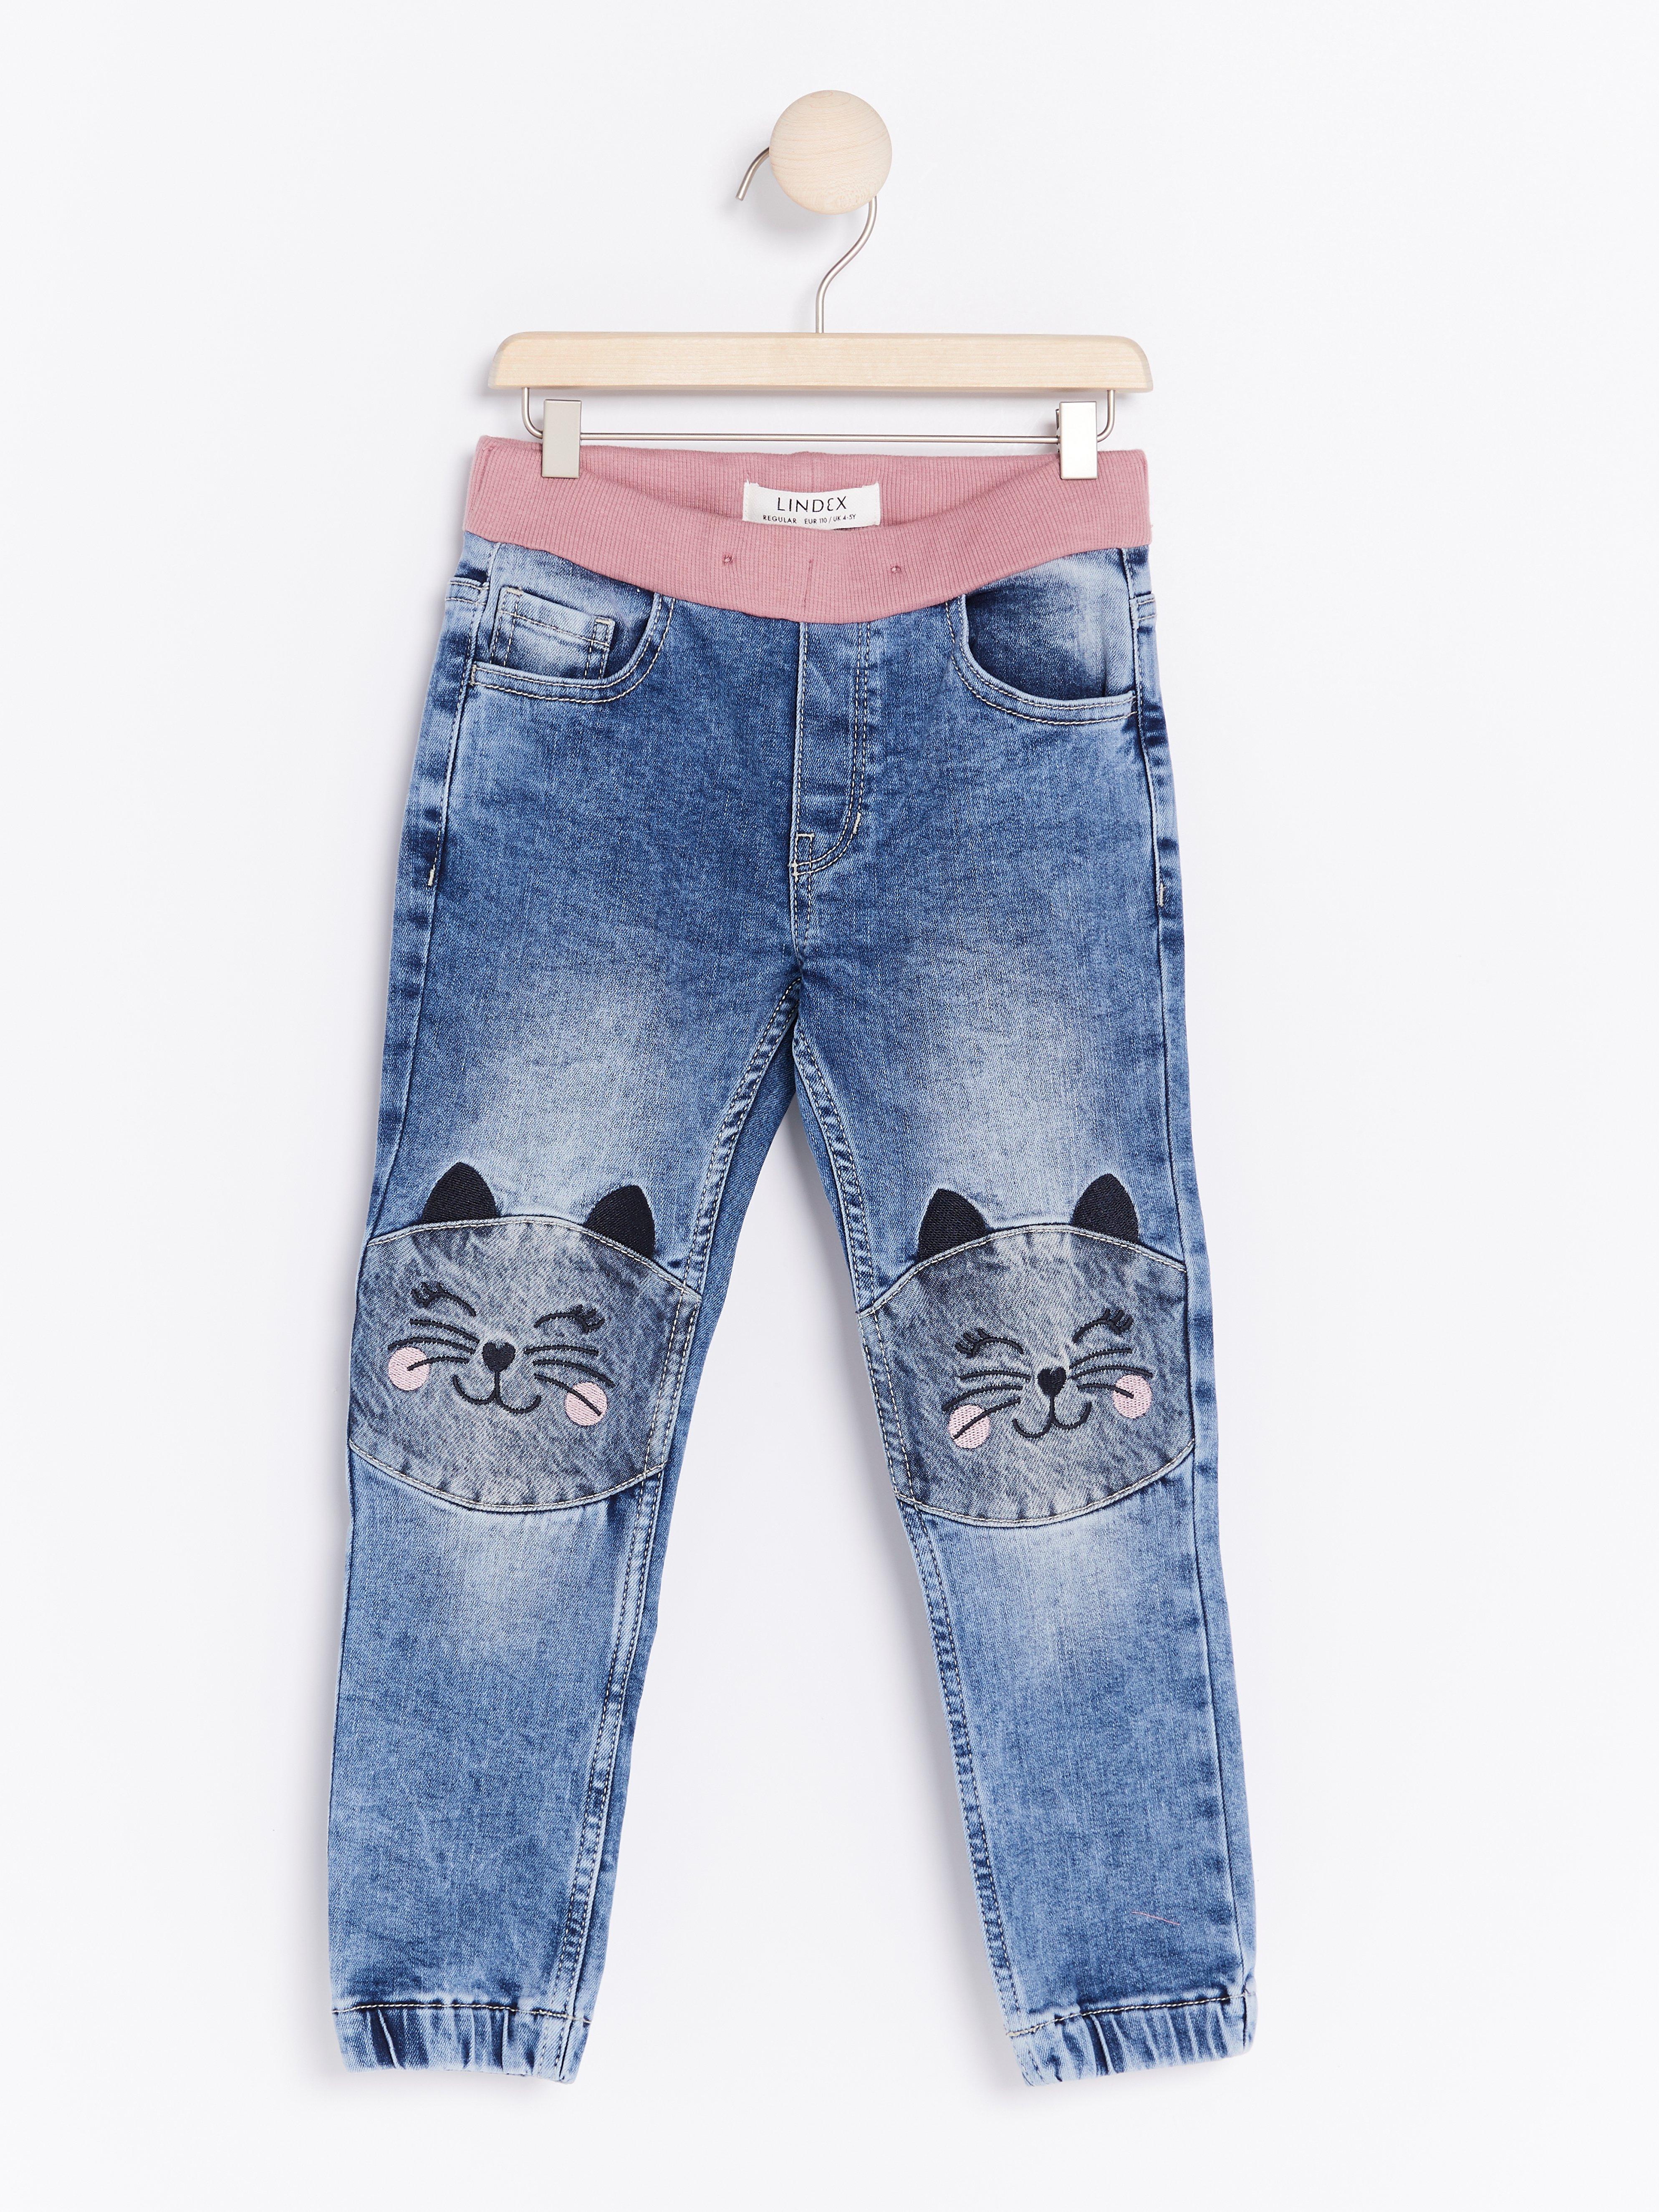 children's jeans with reinforced knees